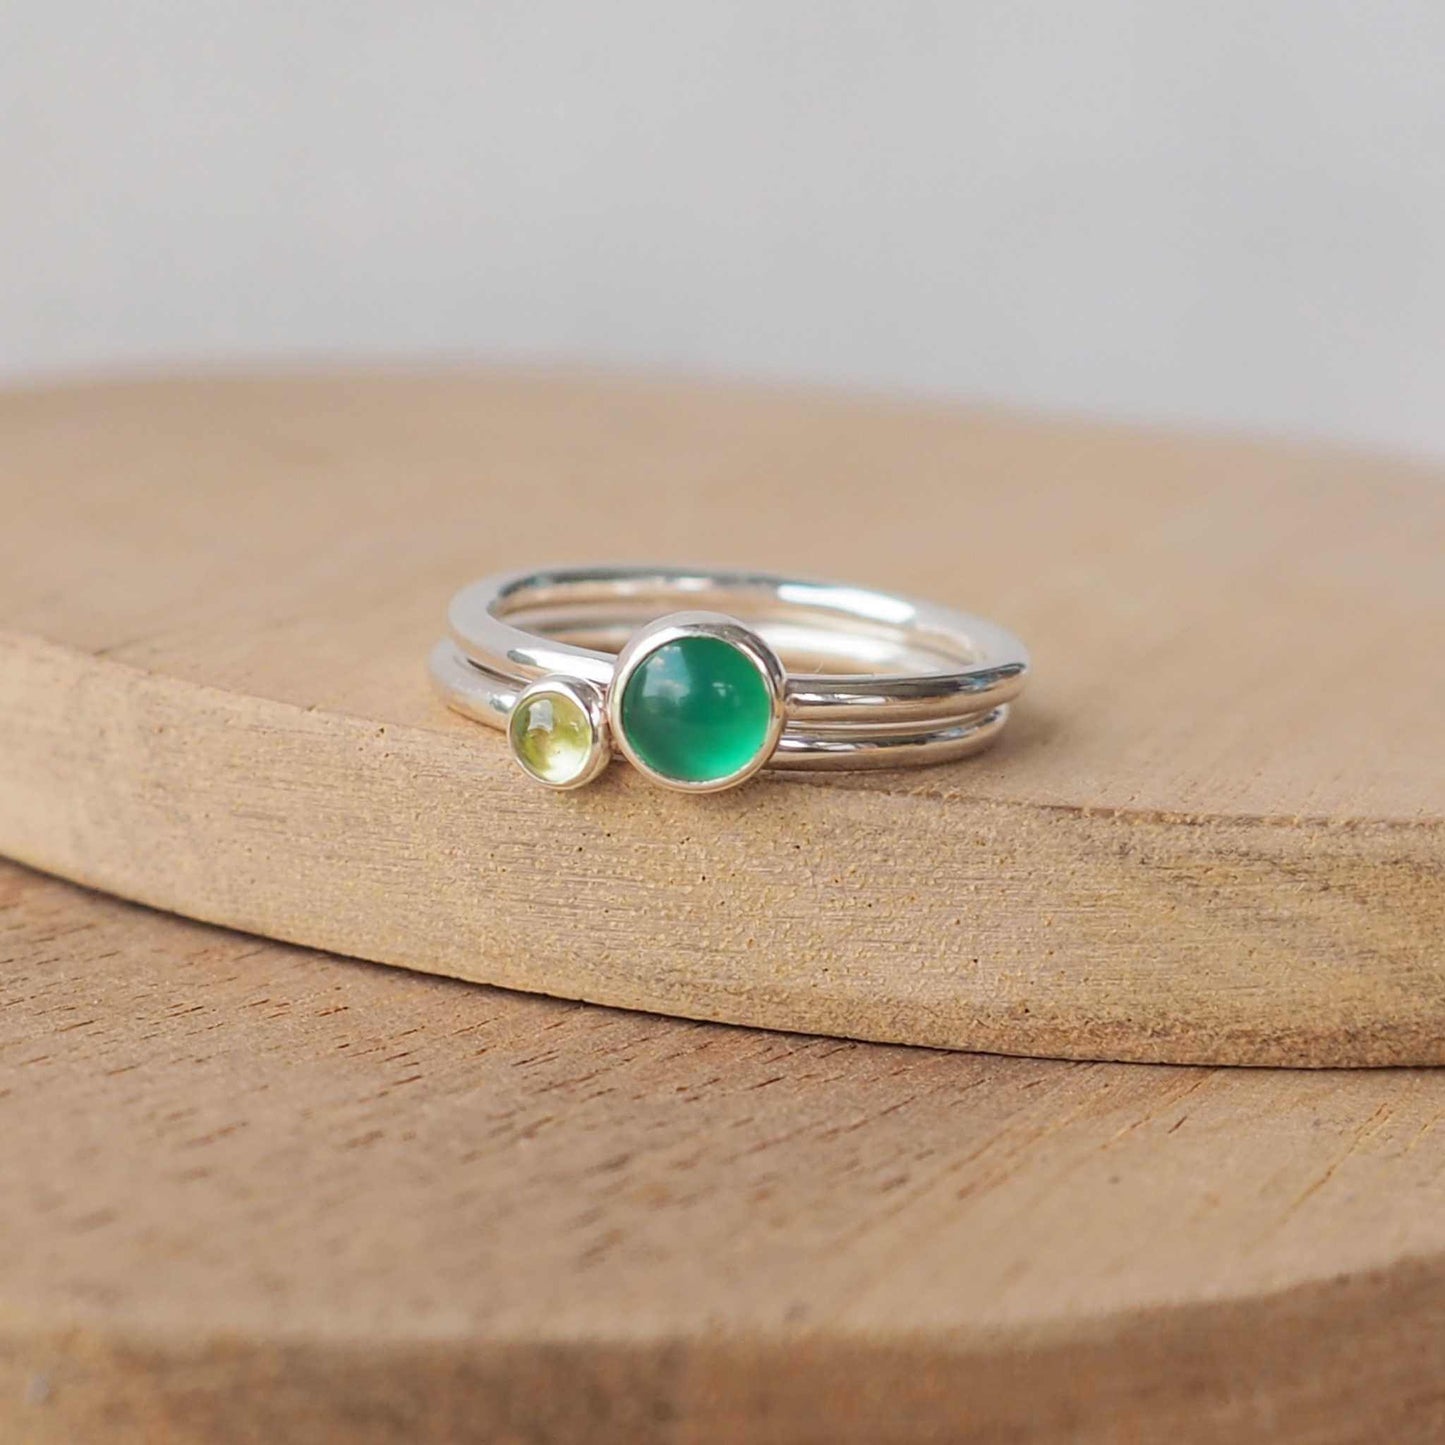 Two silver ring set with round stones. Simple round bands with a 5mm Green Agate and a 3mm Peridot. Rings are pictured on wood background. Handmade in Scotland by Maram Jewellery